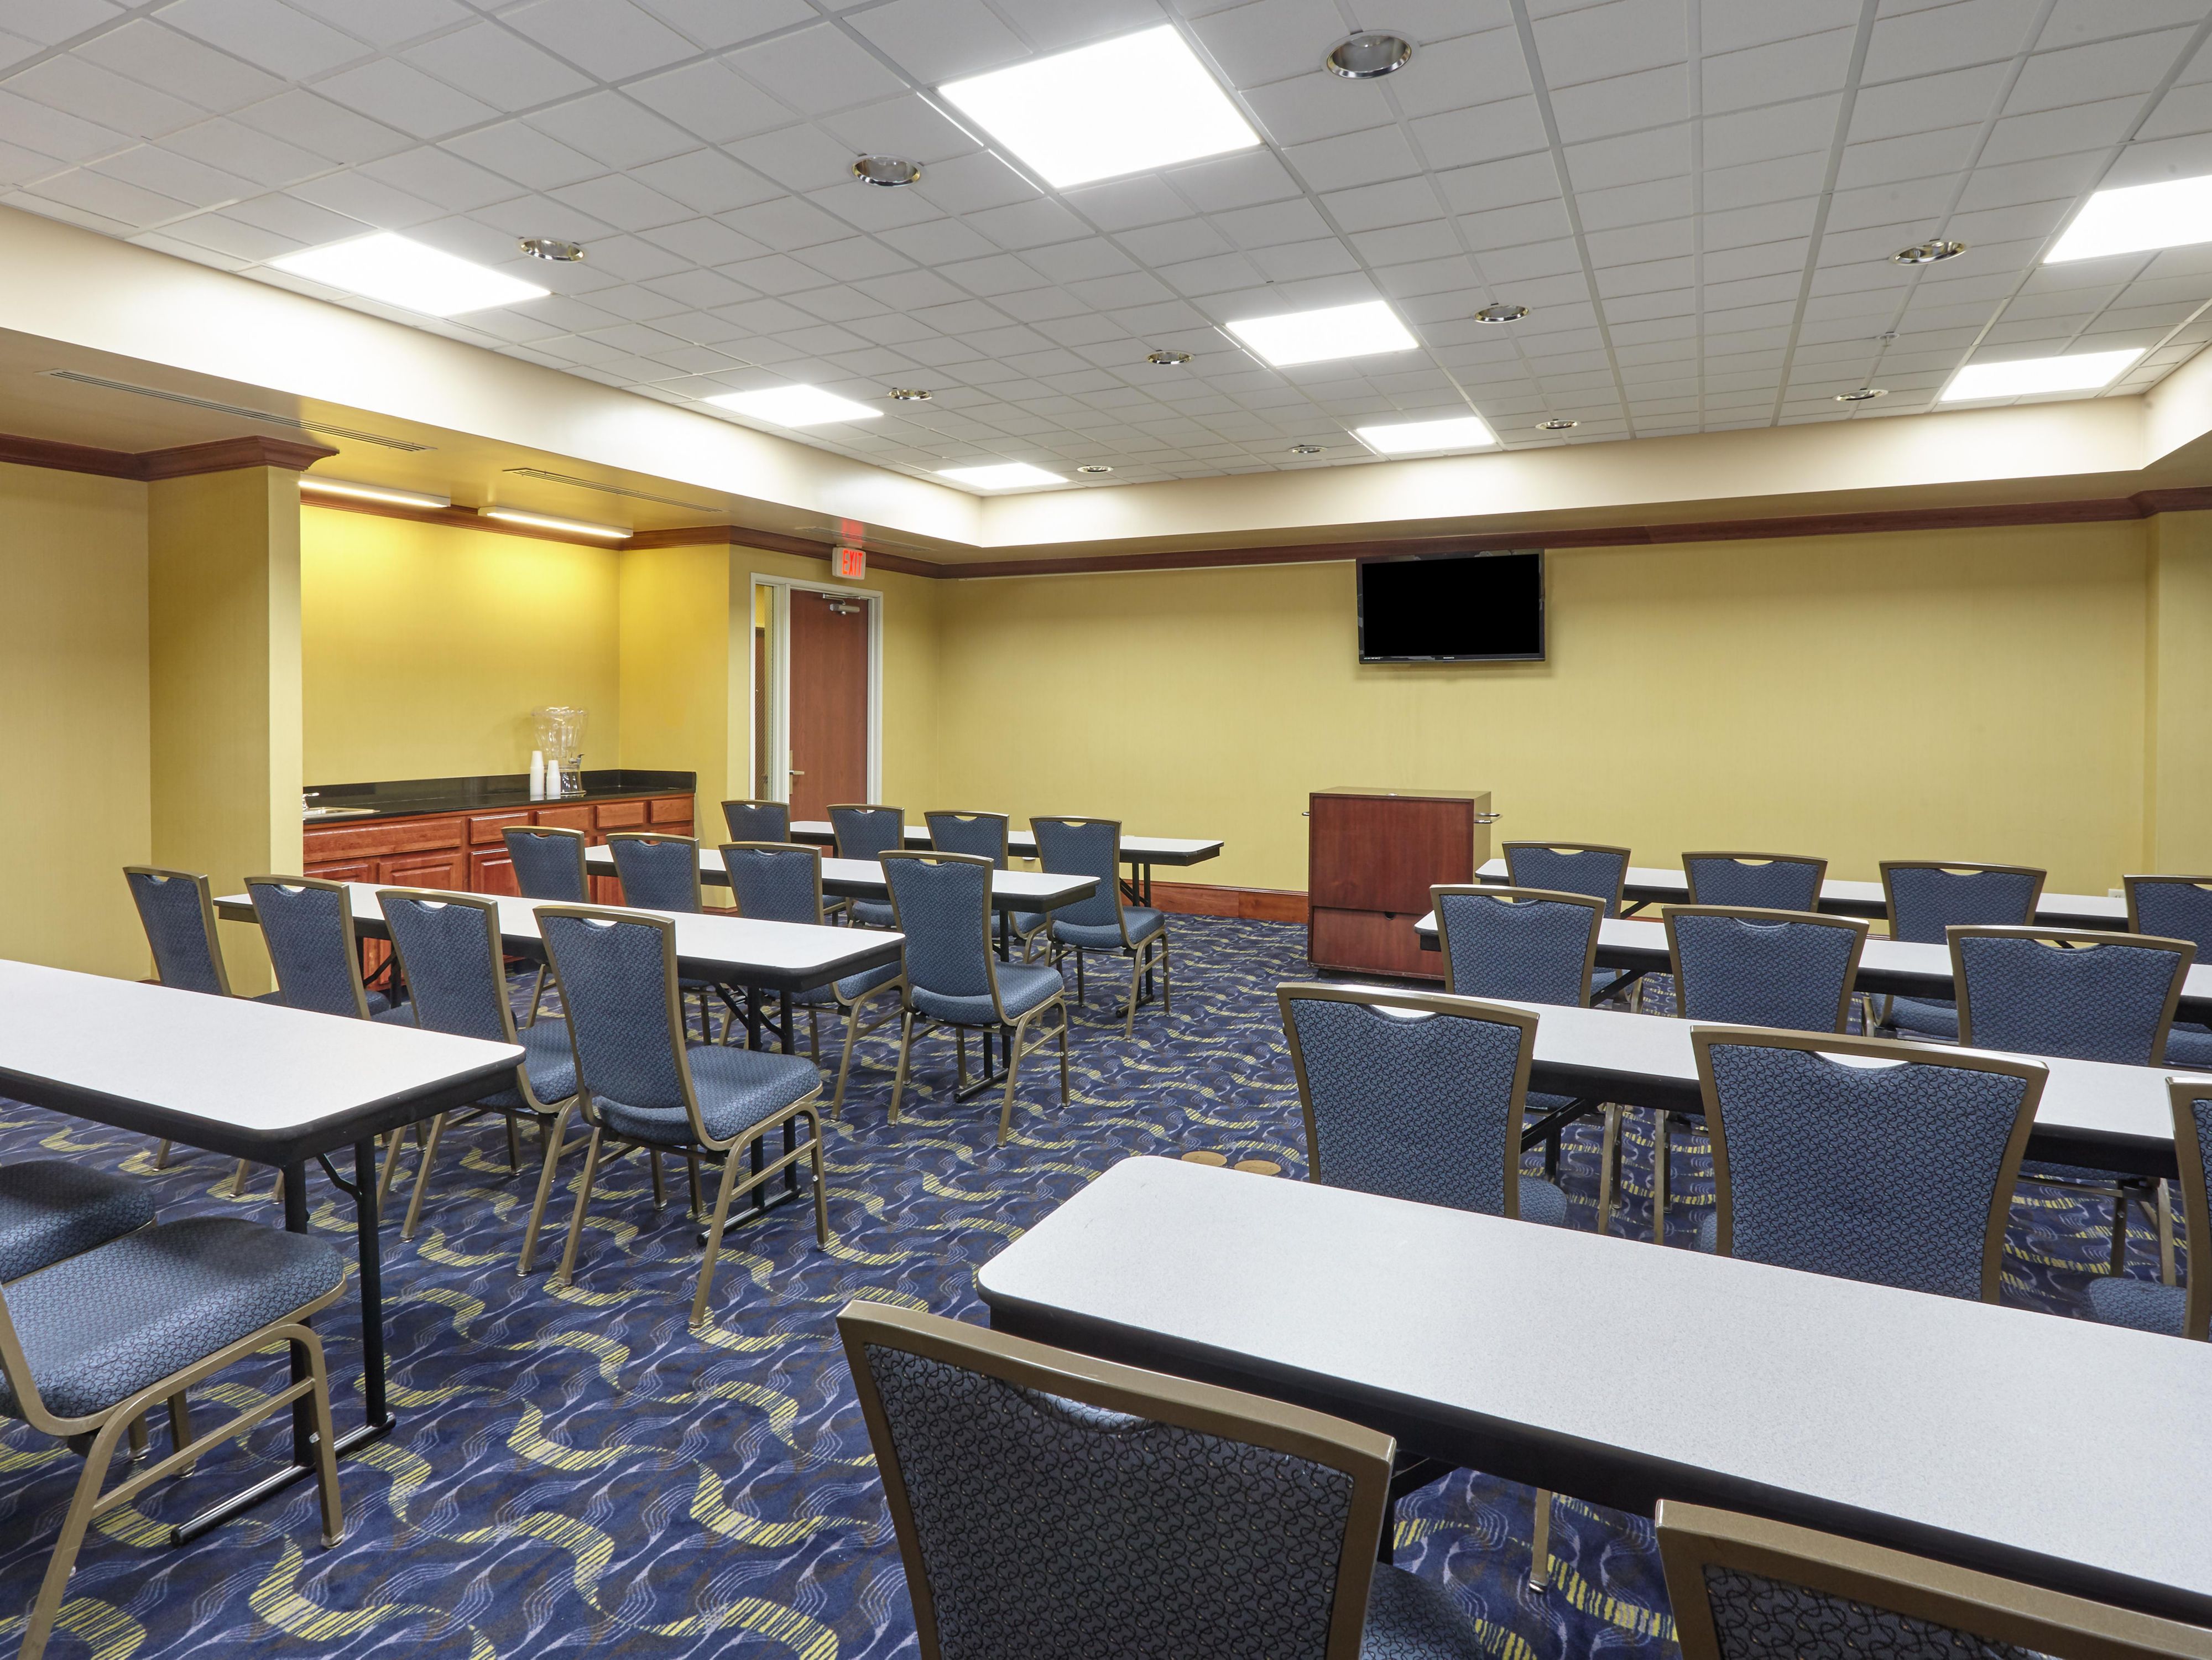 Call our on property hotel team to learn more about our great meeting space!